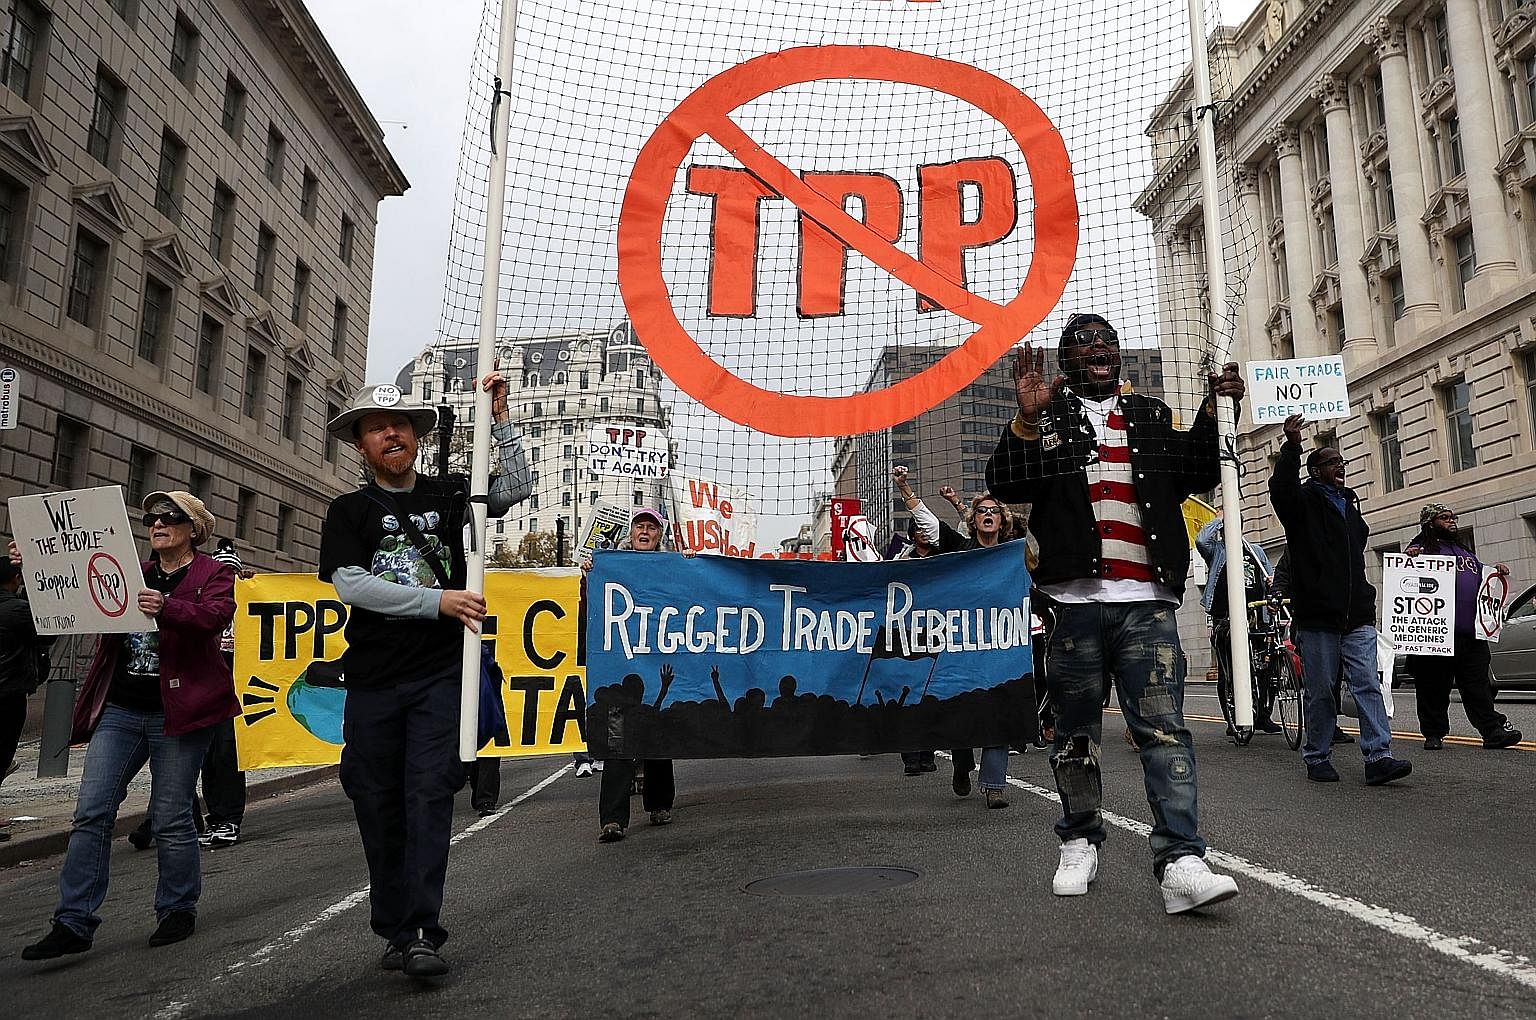 Protesters marching in an anti-TPP rally in Washington, DC last month.